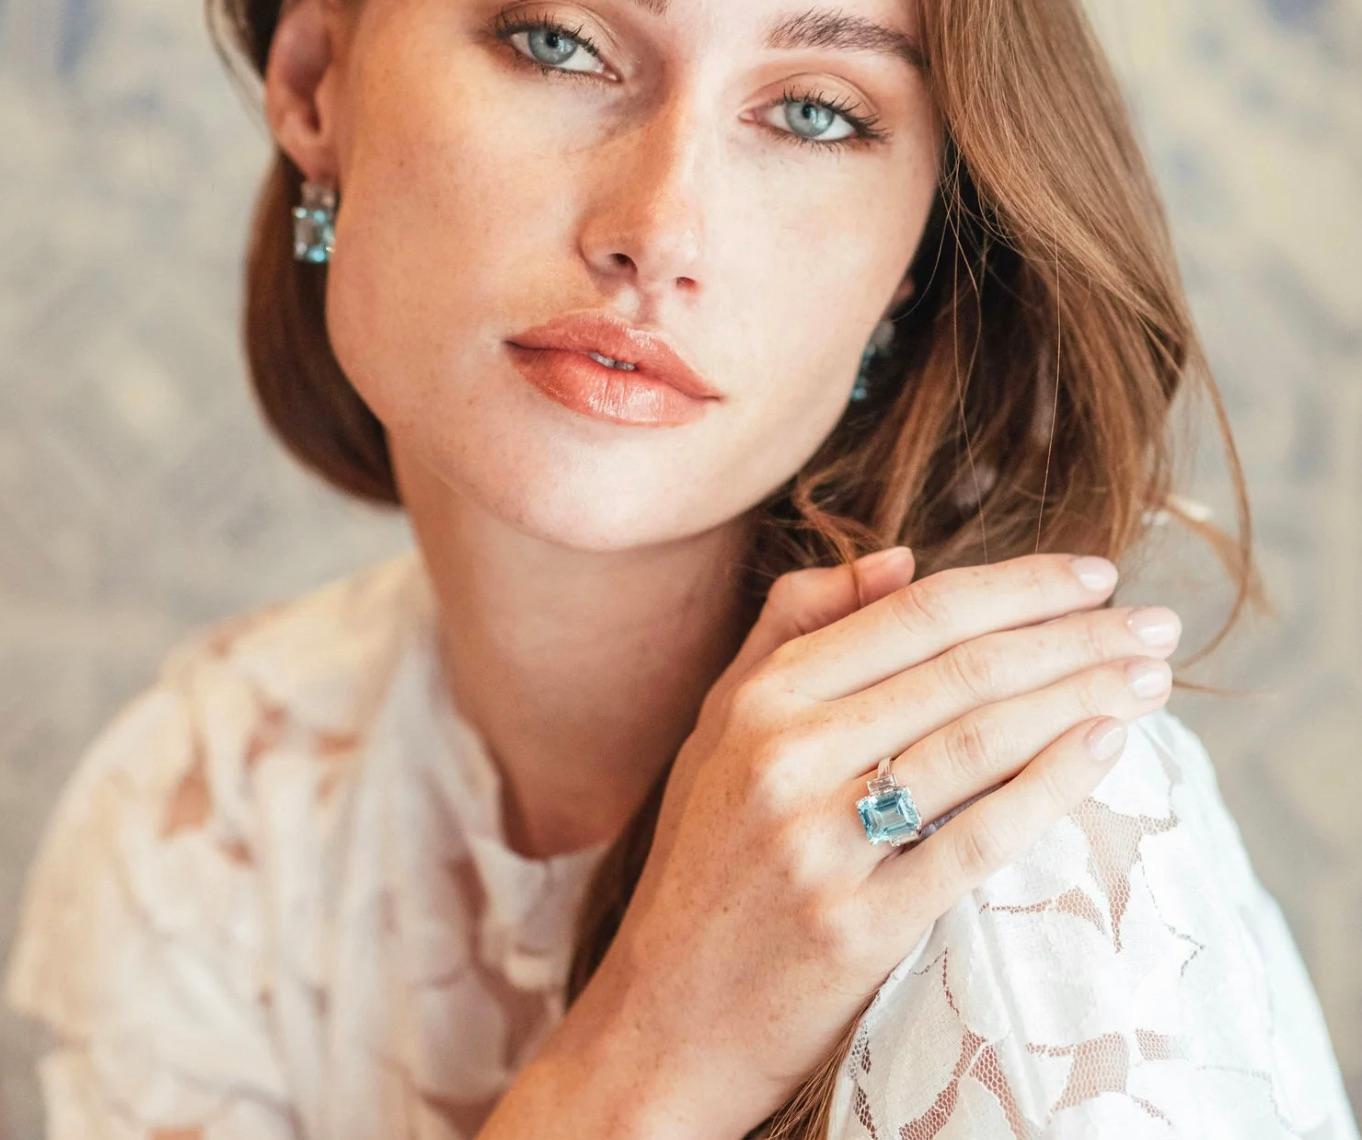 Inspired by the sparkling hues of the Mediterranean Sea, this elegant ring from the Andalusian Collection features a stunning natural sky blue topaz surrounded by two dazzling white topaz baguettes, set in 9ct white gold.

The Andalusian-inspired